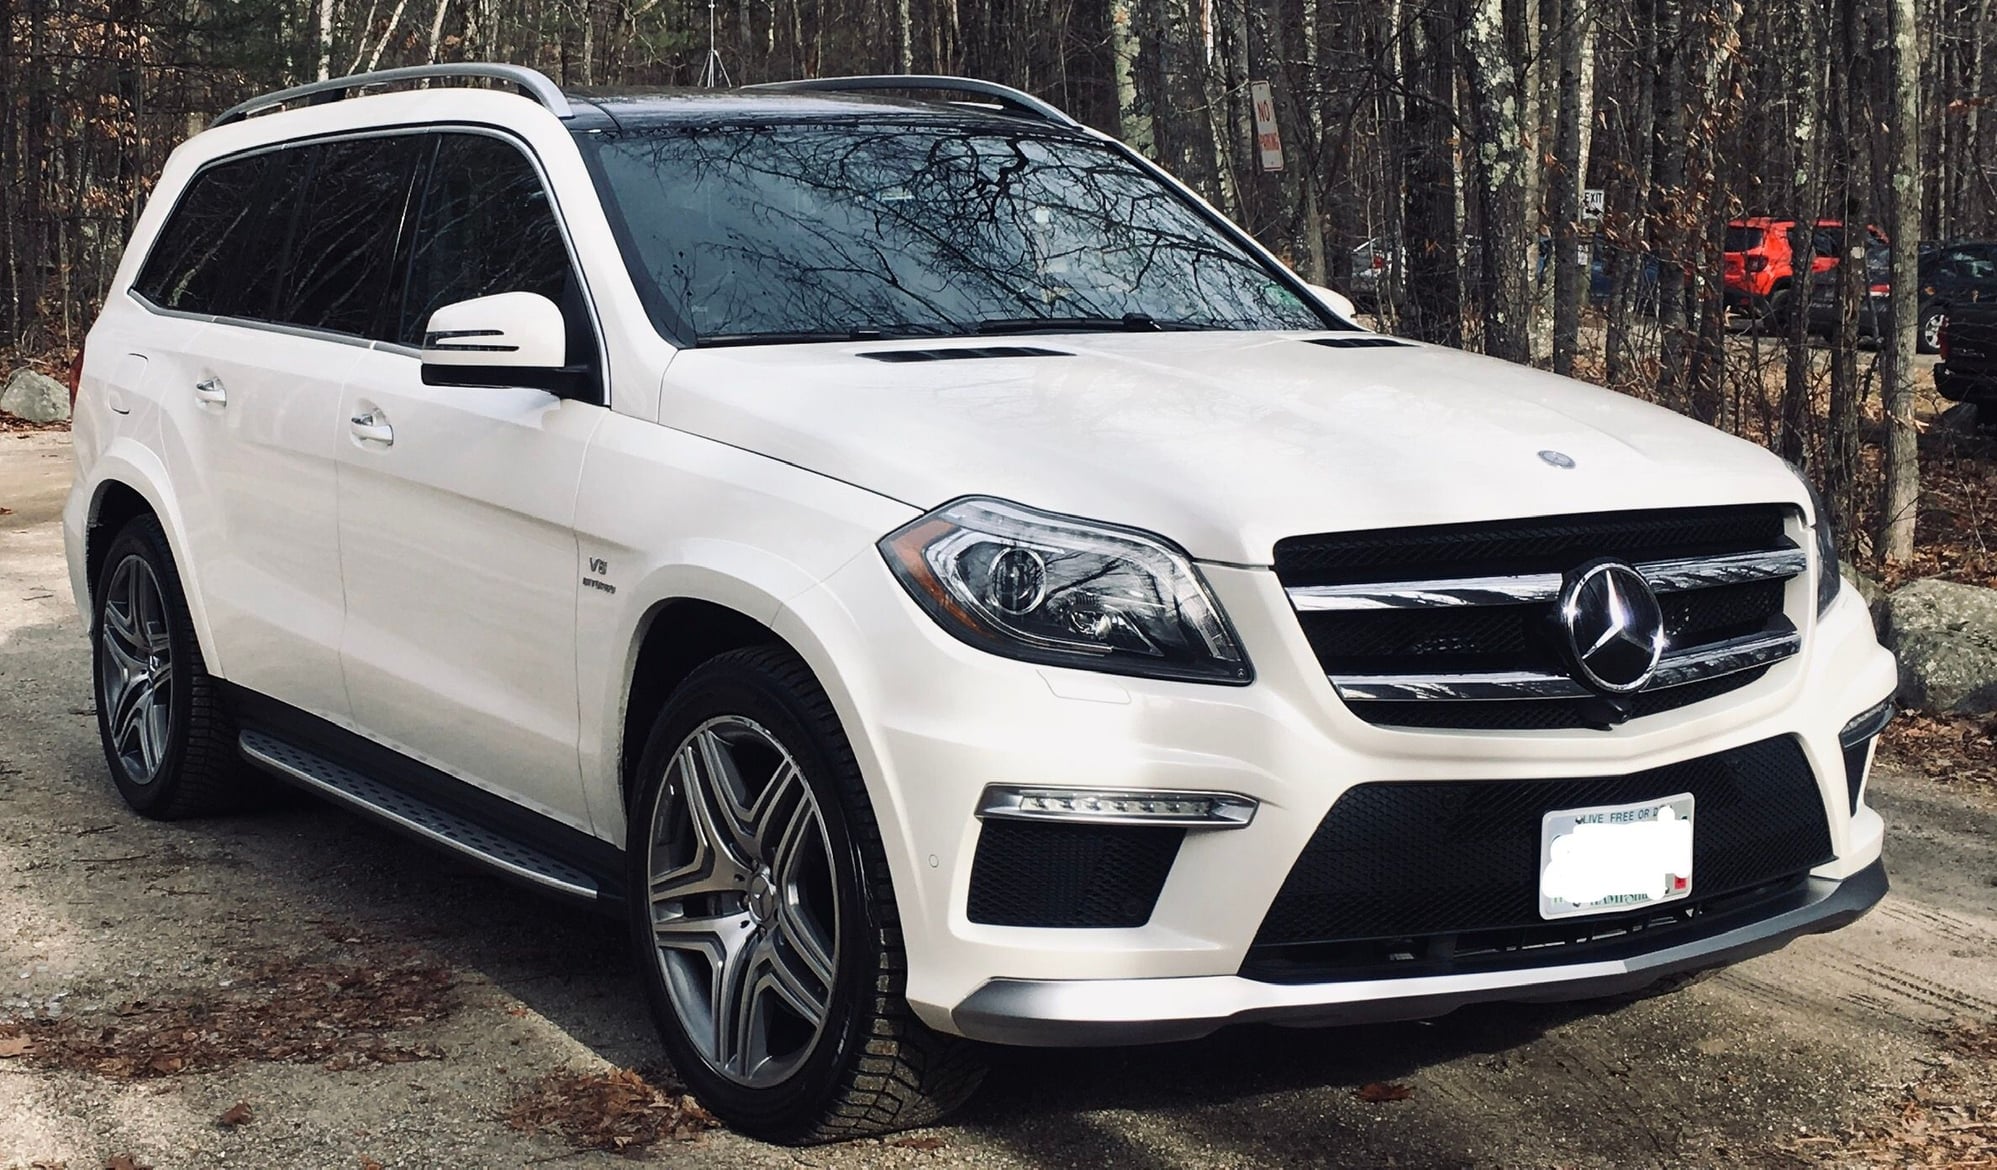 2014 Mercedes-Benz GL63 AMG - 2014 GL63 AMG ~61K miles - Used - VIN 4JGDF7EE0EA309705 - 61,000 Miles - 8 cyl - AWD - Automatic - SUV - White - Keene, NH 03431, United States